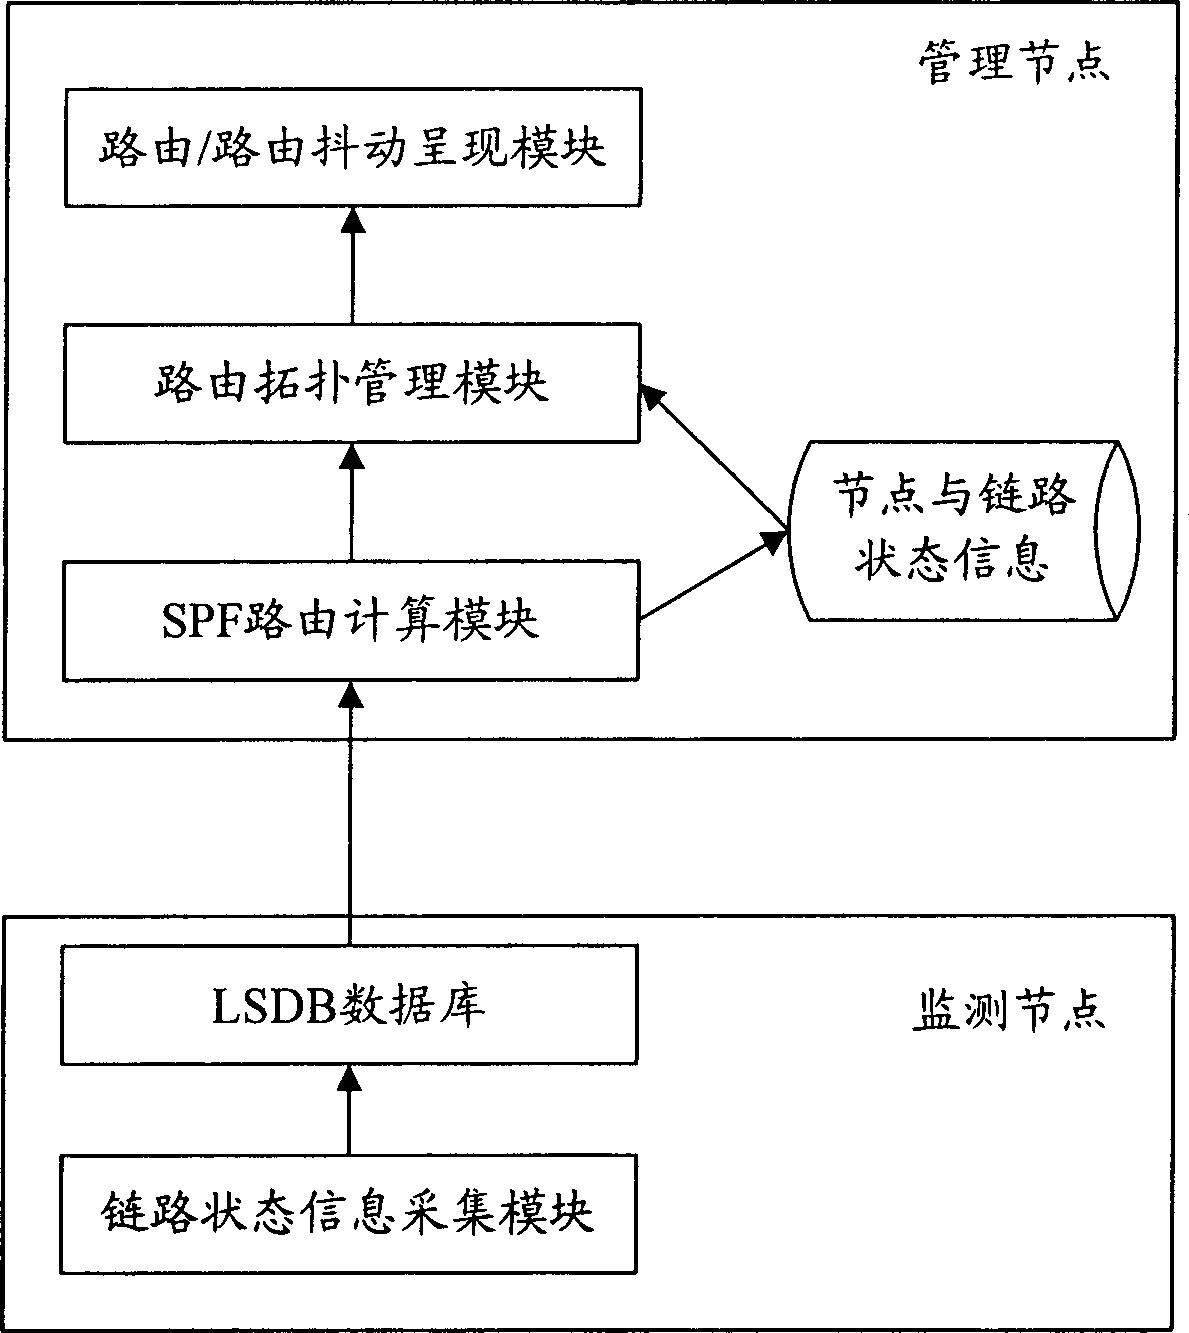 Monitoring and analyzing system for opening shortest path priority route protocol and working method